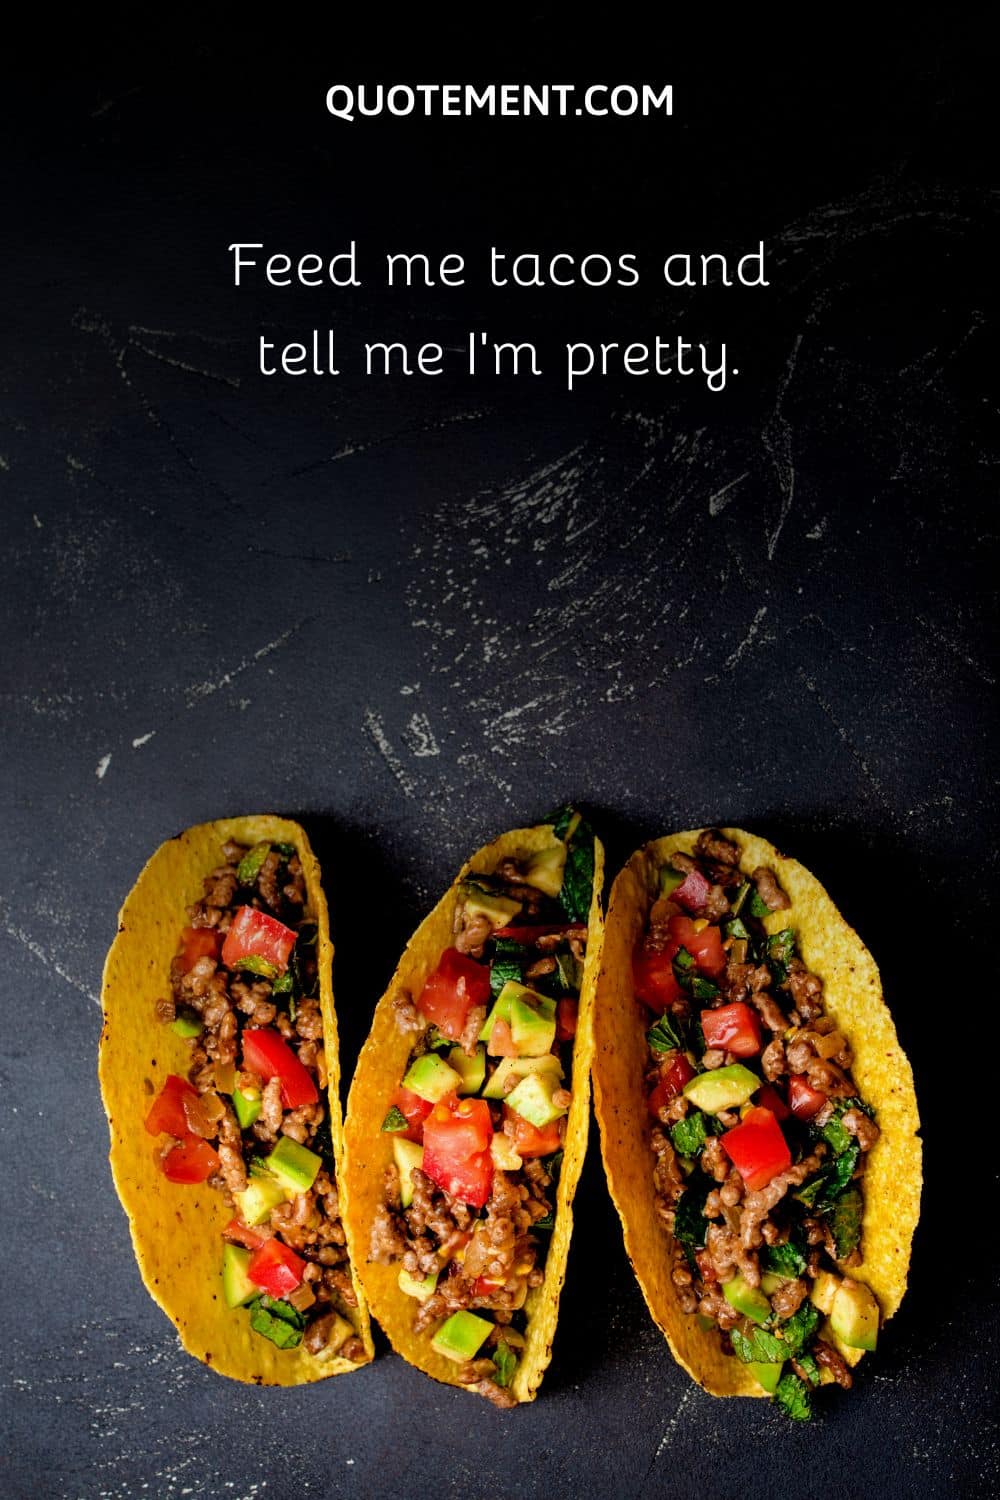 Feed me tacos and tell me I’m pretty